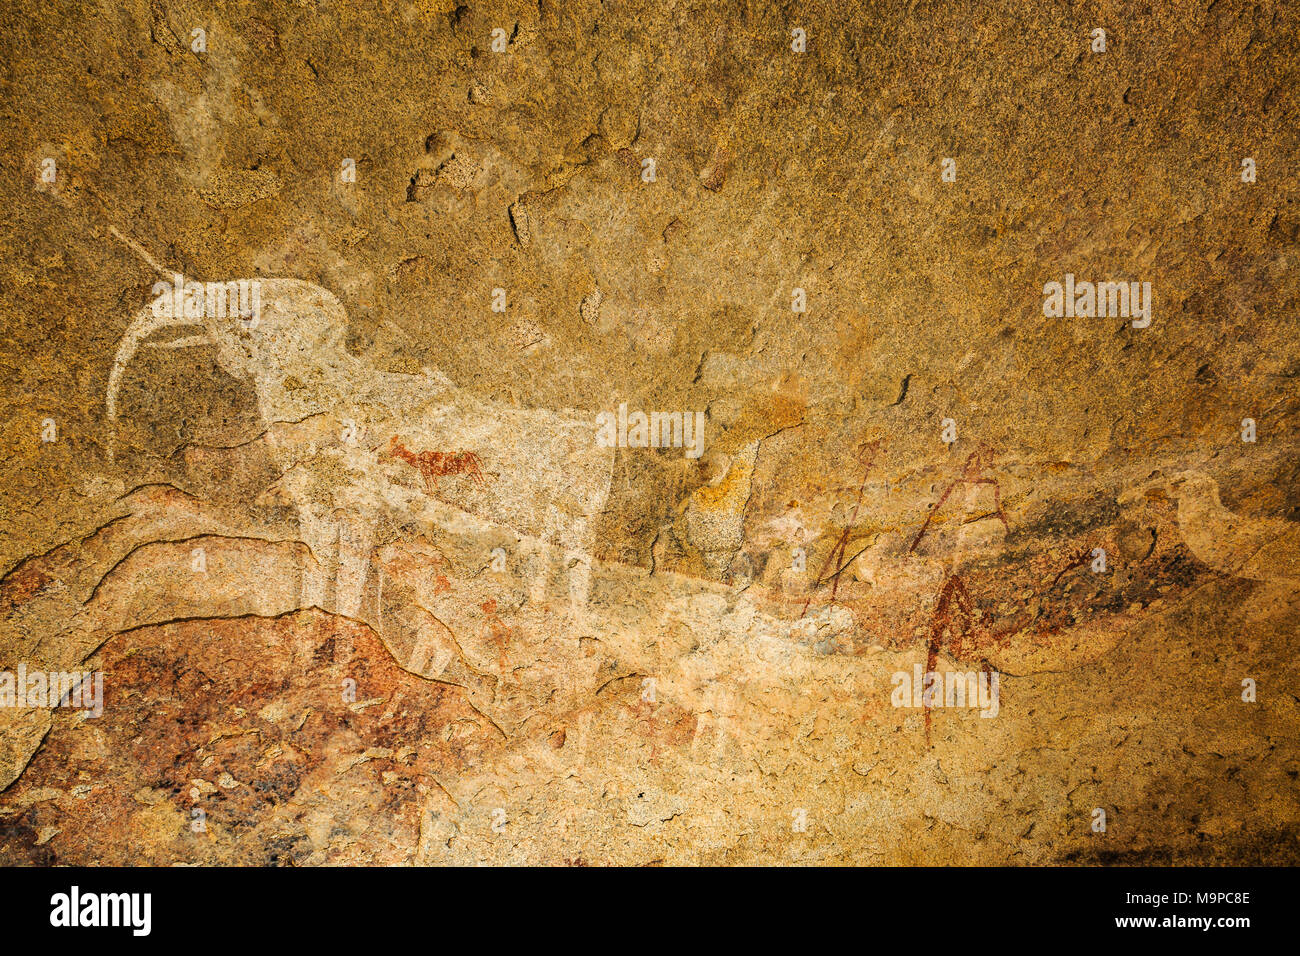 Rock Paintings, Phillips Cave, Ameib Ranch, Erongo Region, Namibia Stock Photo